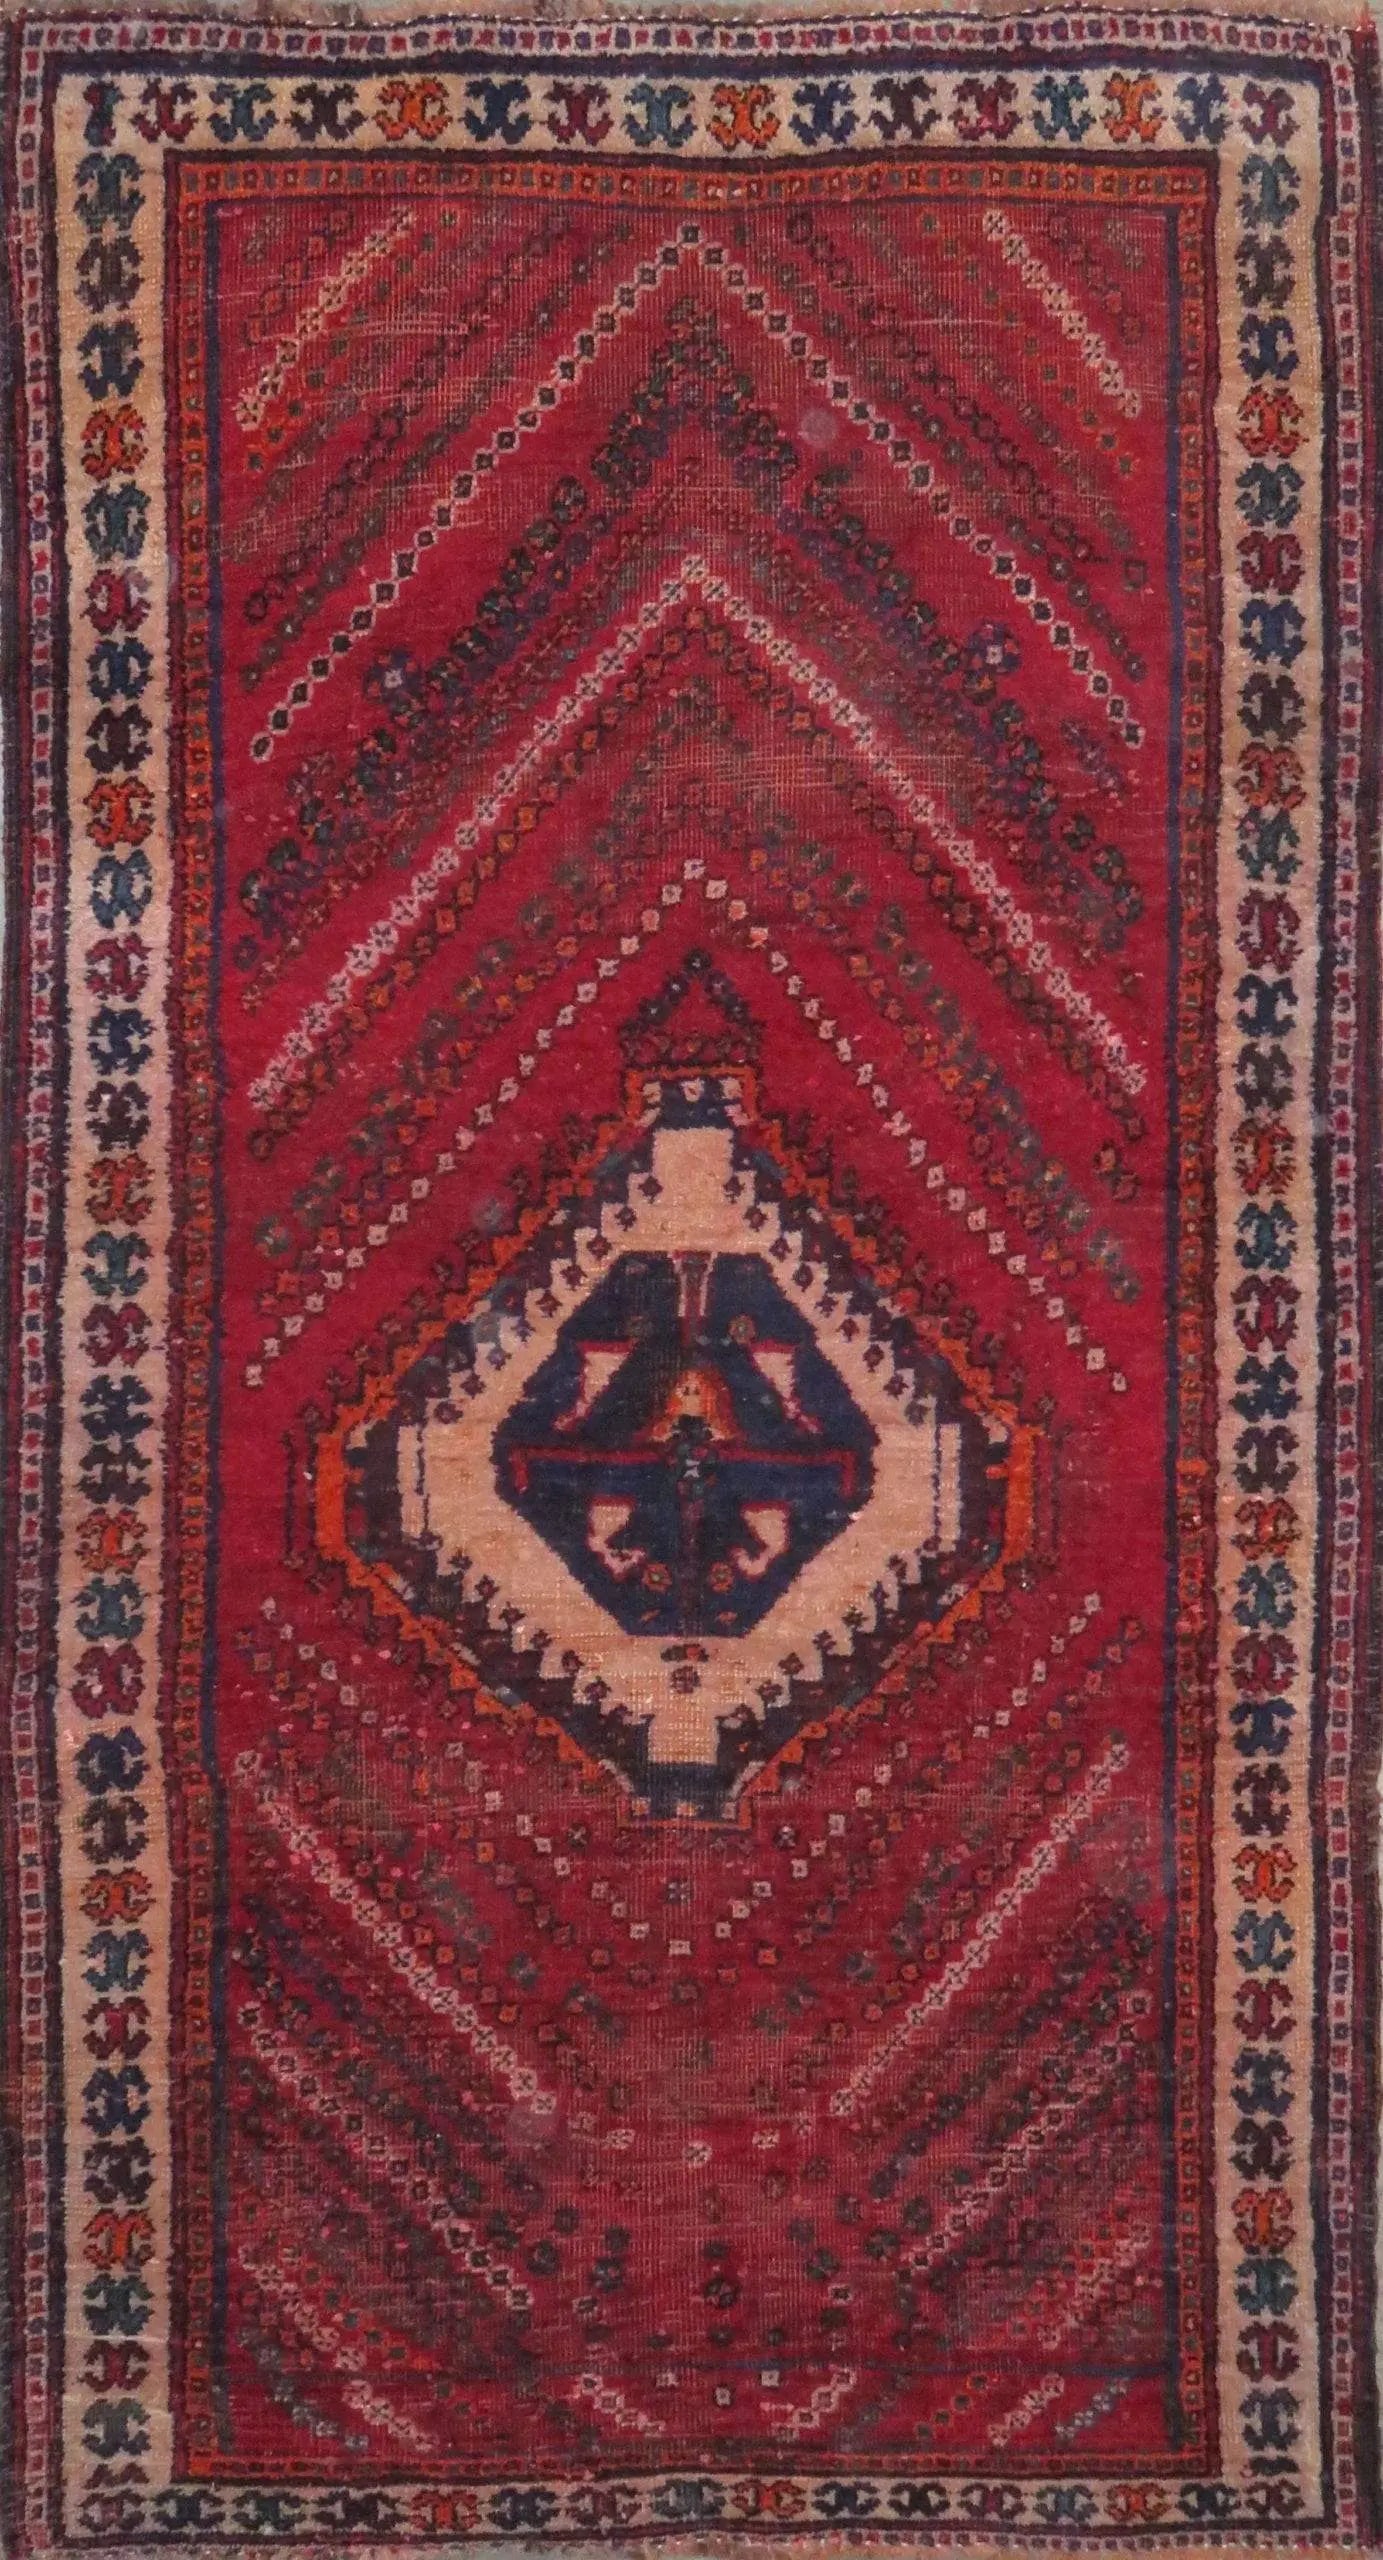 Hand-Knotted Persian Wool Rug _ Luxurious Vintage Design, 6'2" x 3'5", Artisan Crafted